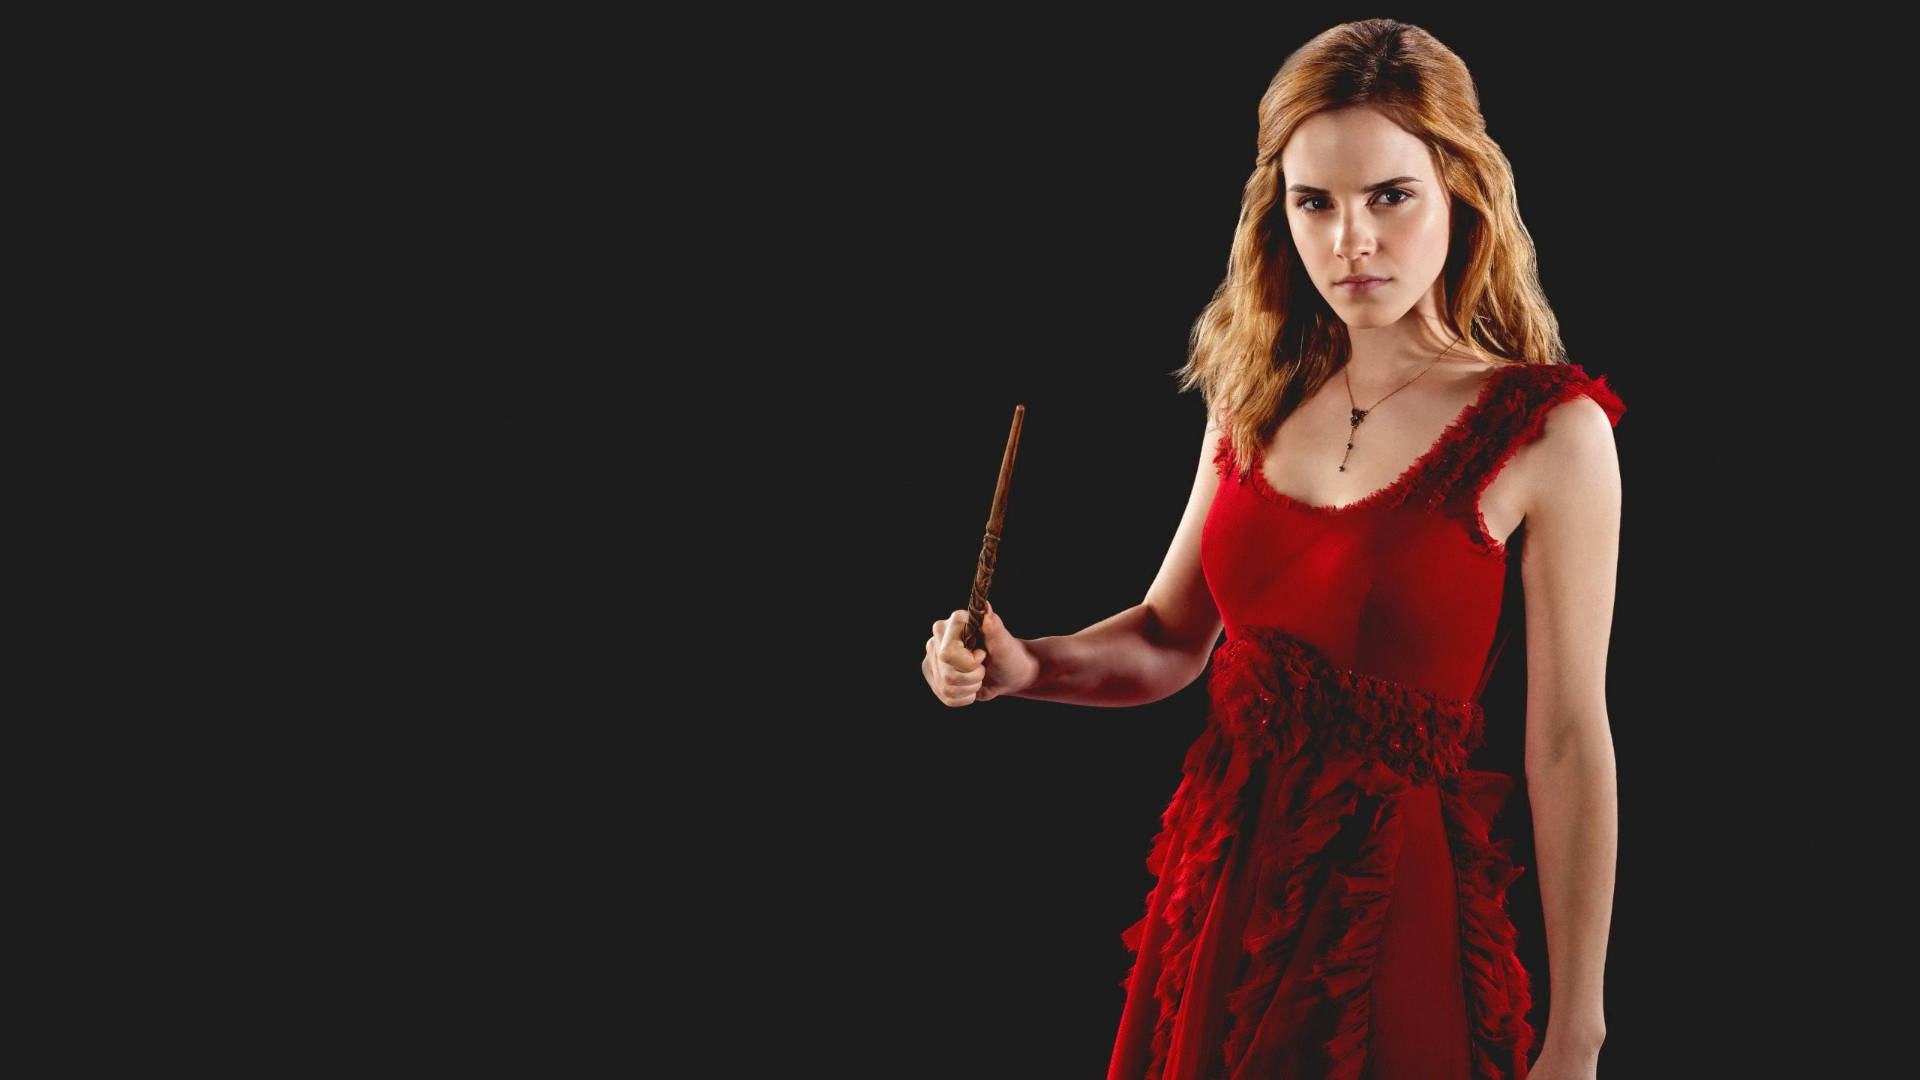 Hermione Granger Looking Beautiful In A Red Dress Background